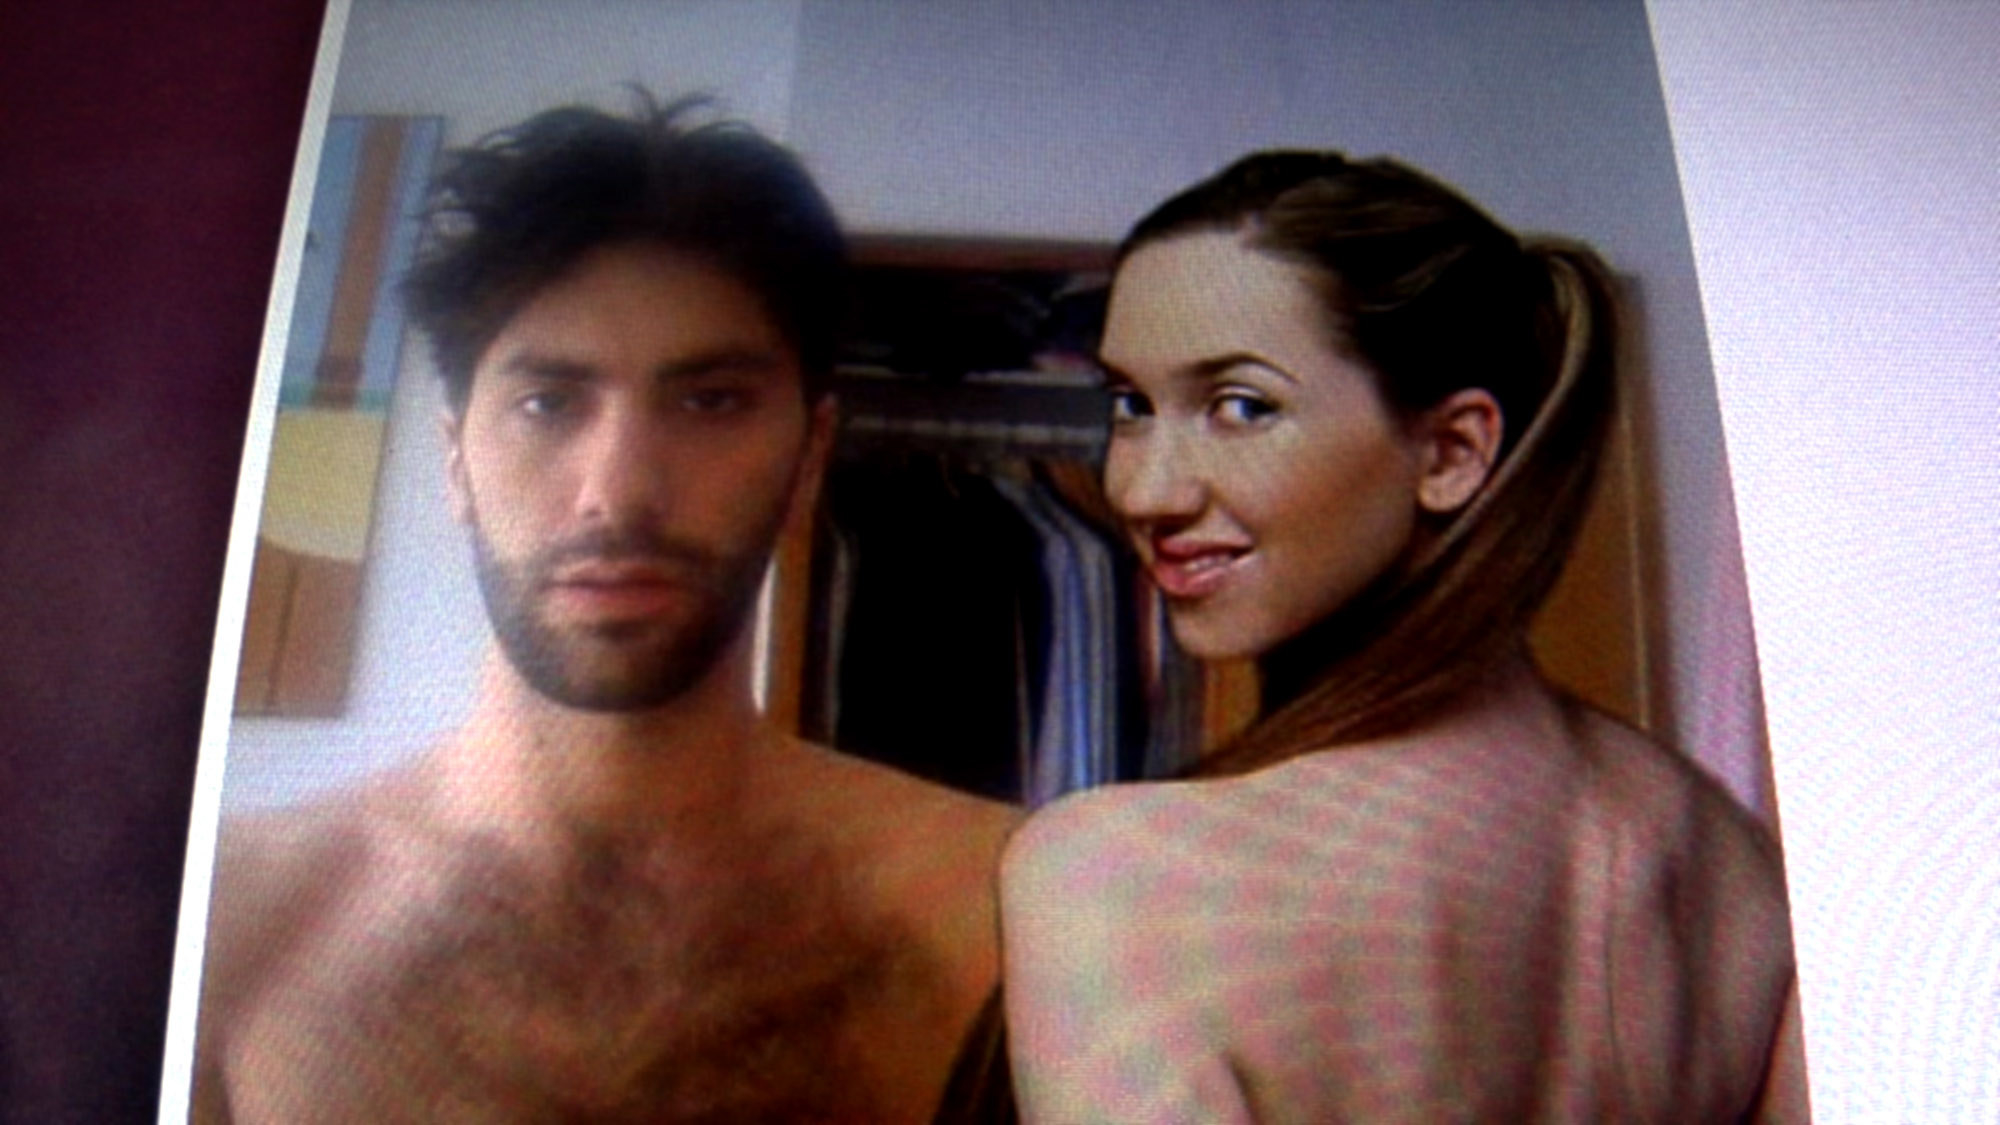 Nev Schulman and a woman posing in a photo in Catfish the movie